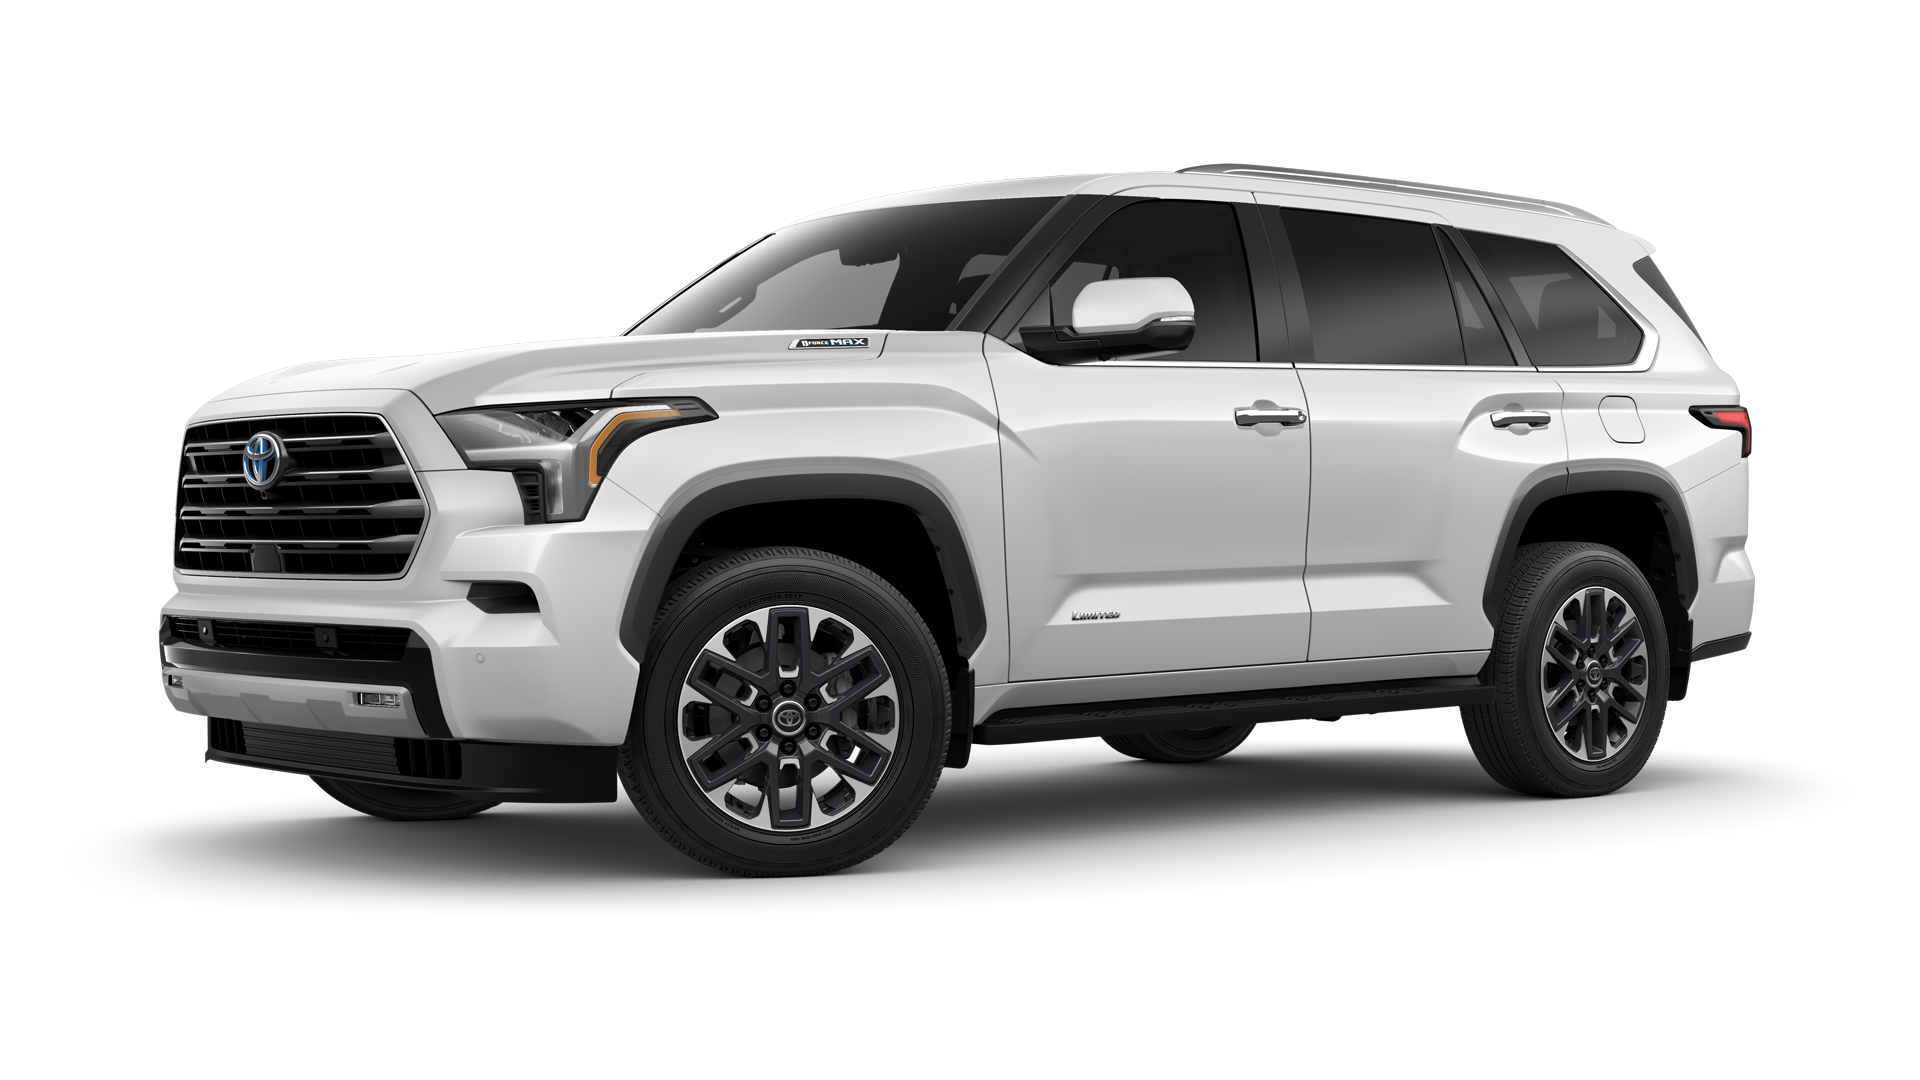 Introduce 182+ images when does the toyota sequoia 2023 come out In